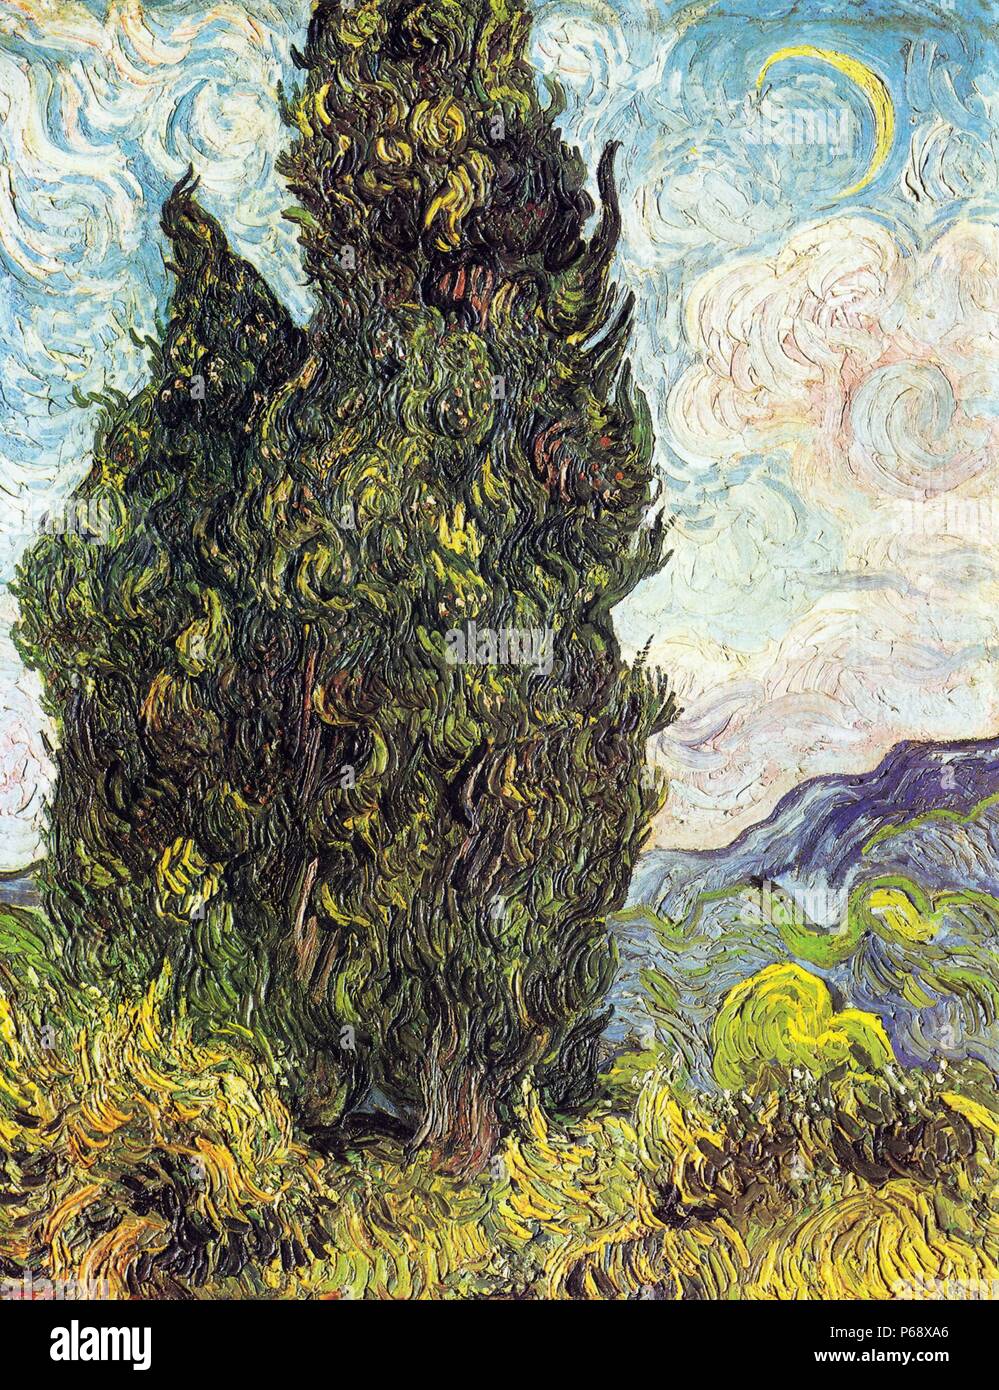 Cypresses' by Vincent Van Gogh (1853-1890) a post-impressionist painter of Dutch origin. Dated 1889. Stock Photo